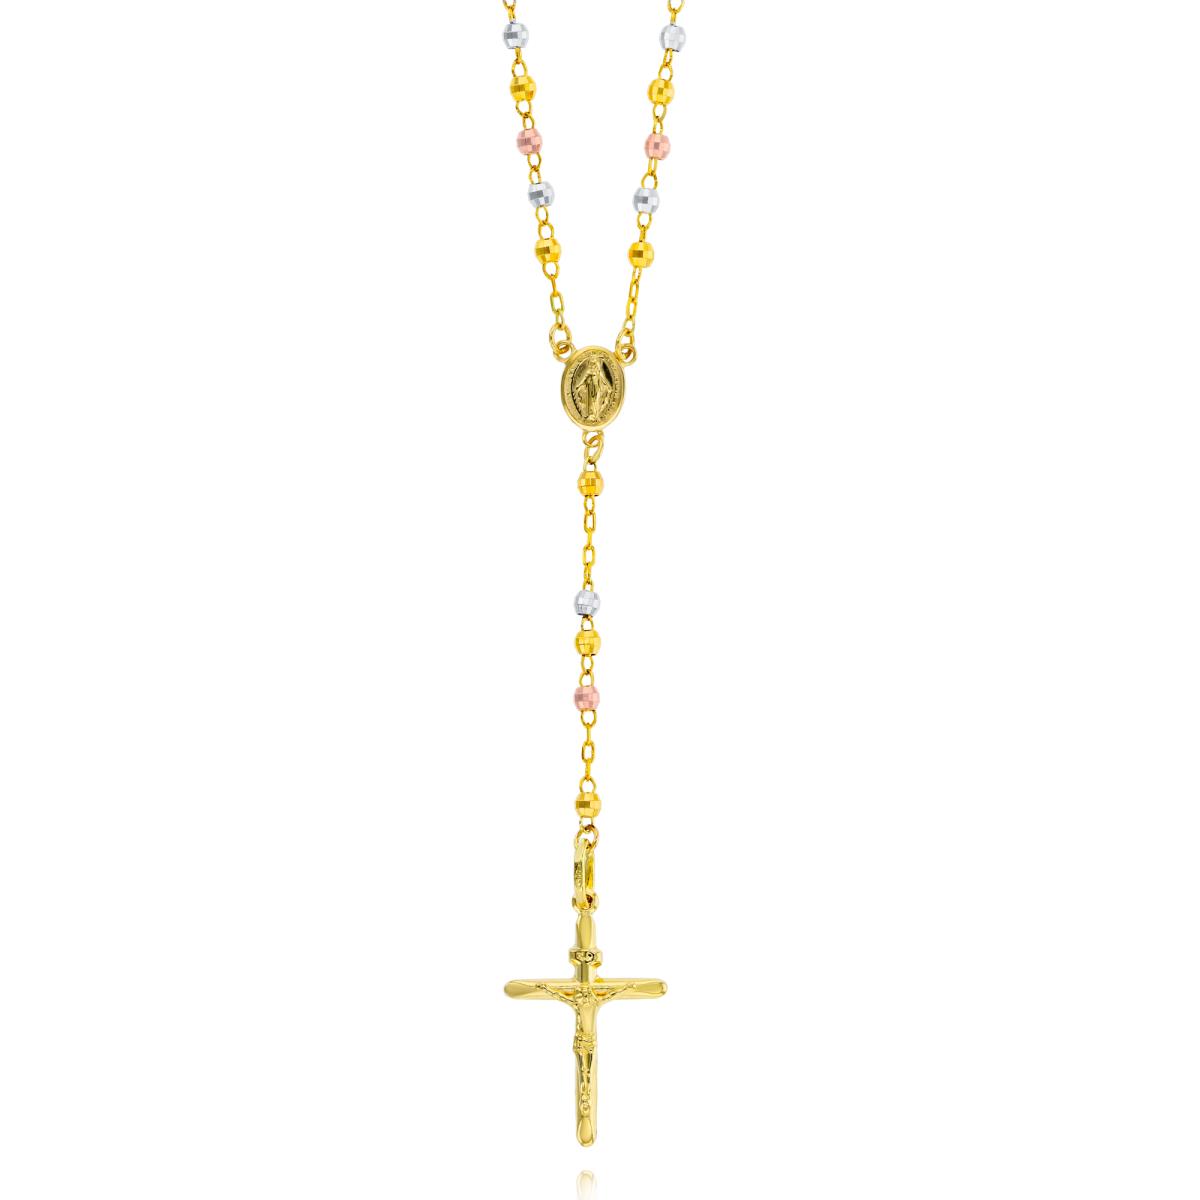 14K Tricolor Gold 3mm 17" DC Beads Rosary Necklace 